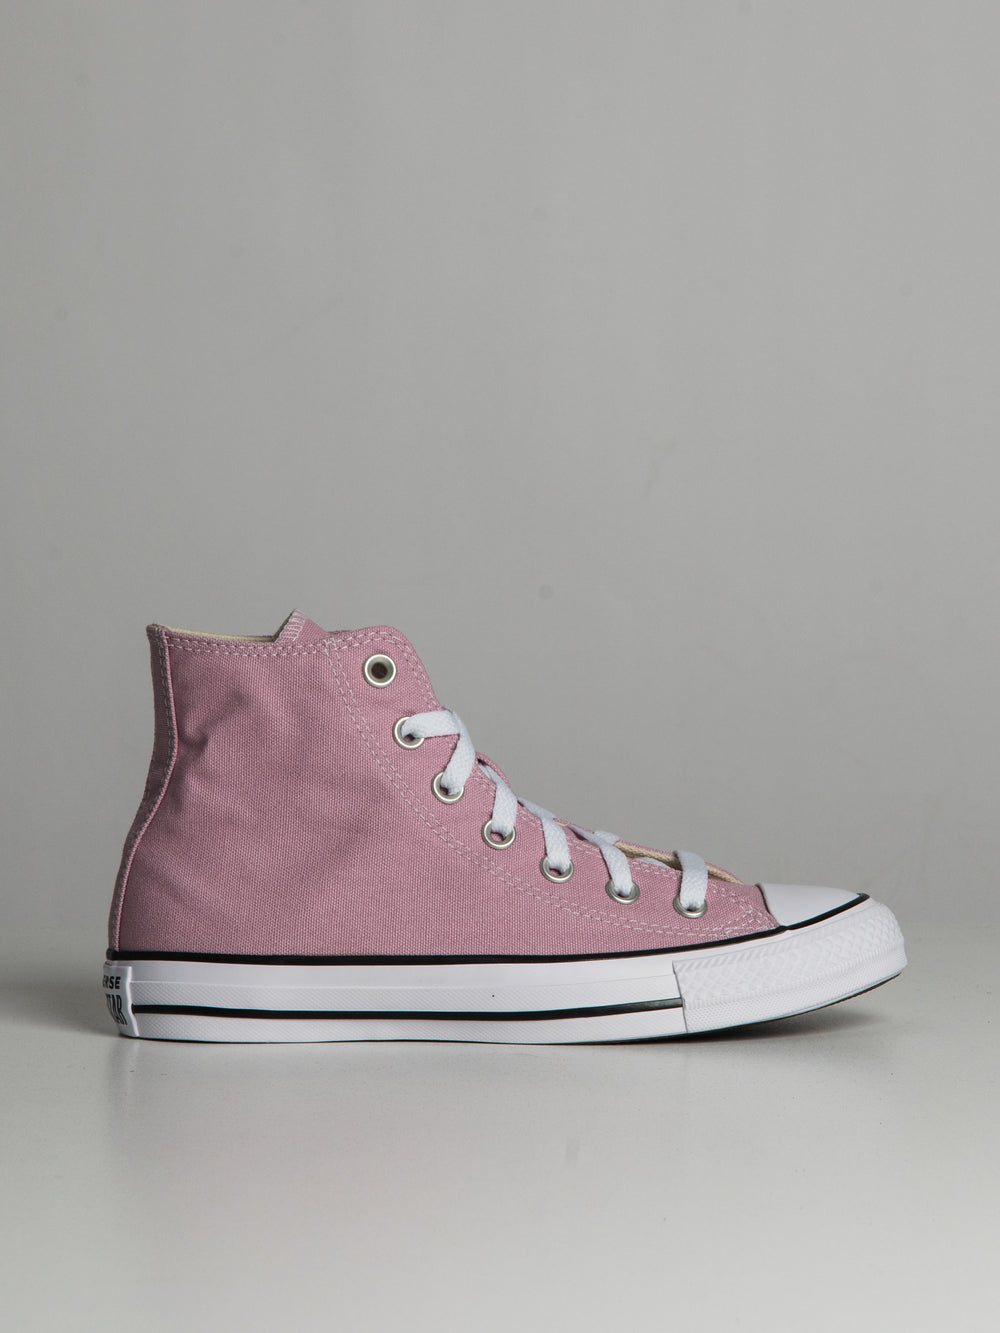 Converse Chuck Taylor All Star Hi sneakers in light pink